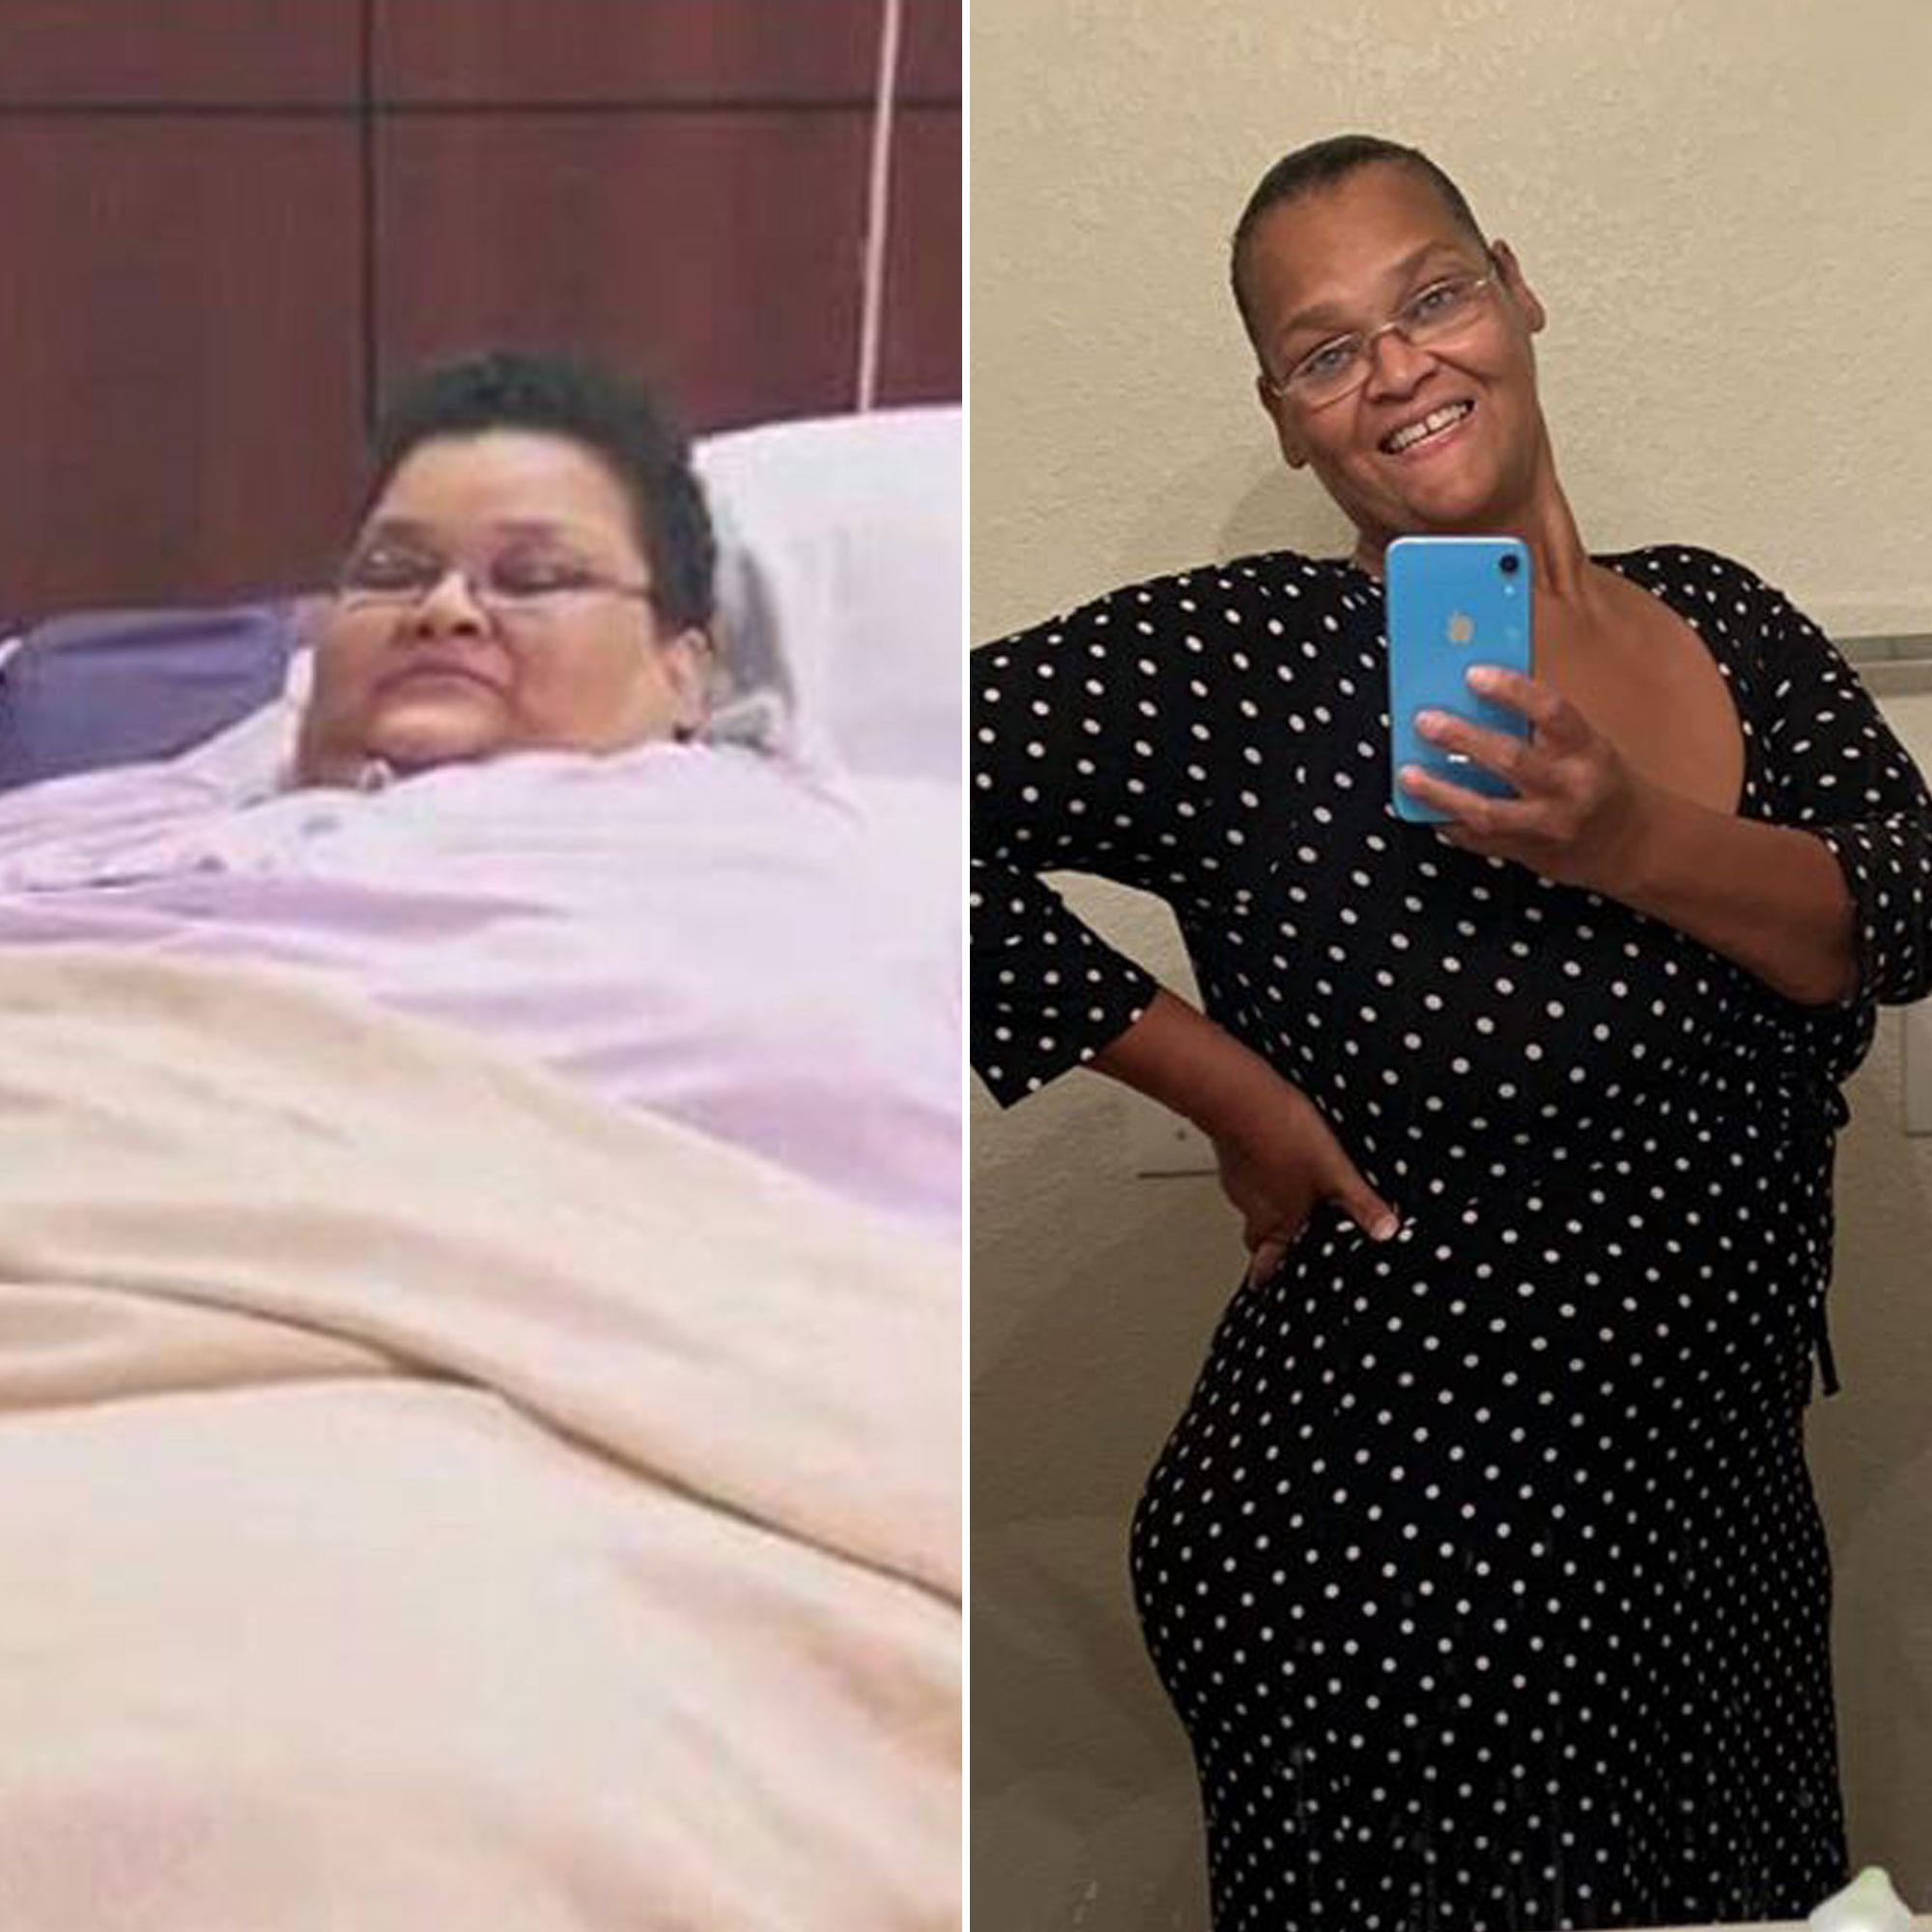 My 600 Lb Life Success Stories See Weight Loss Transformations